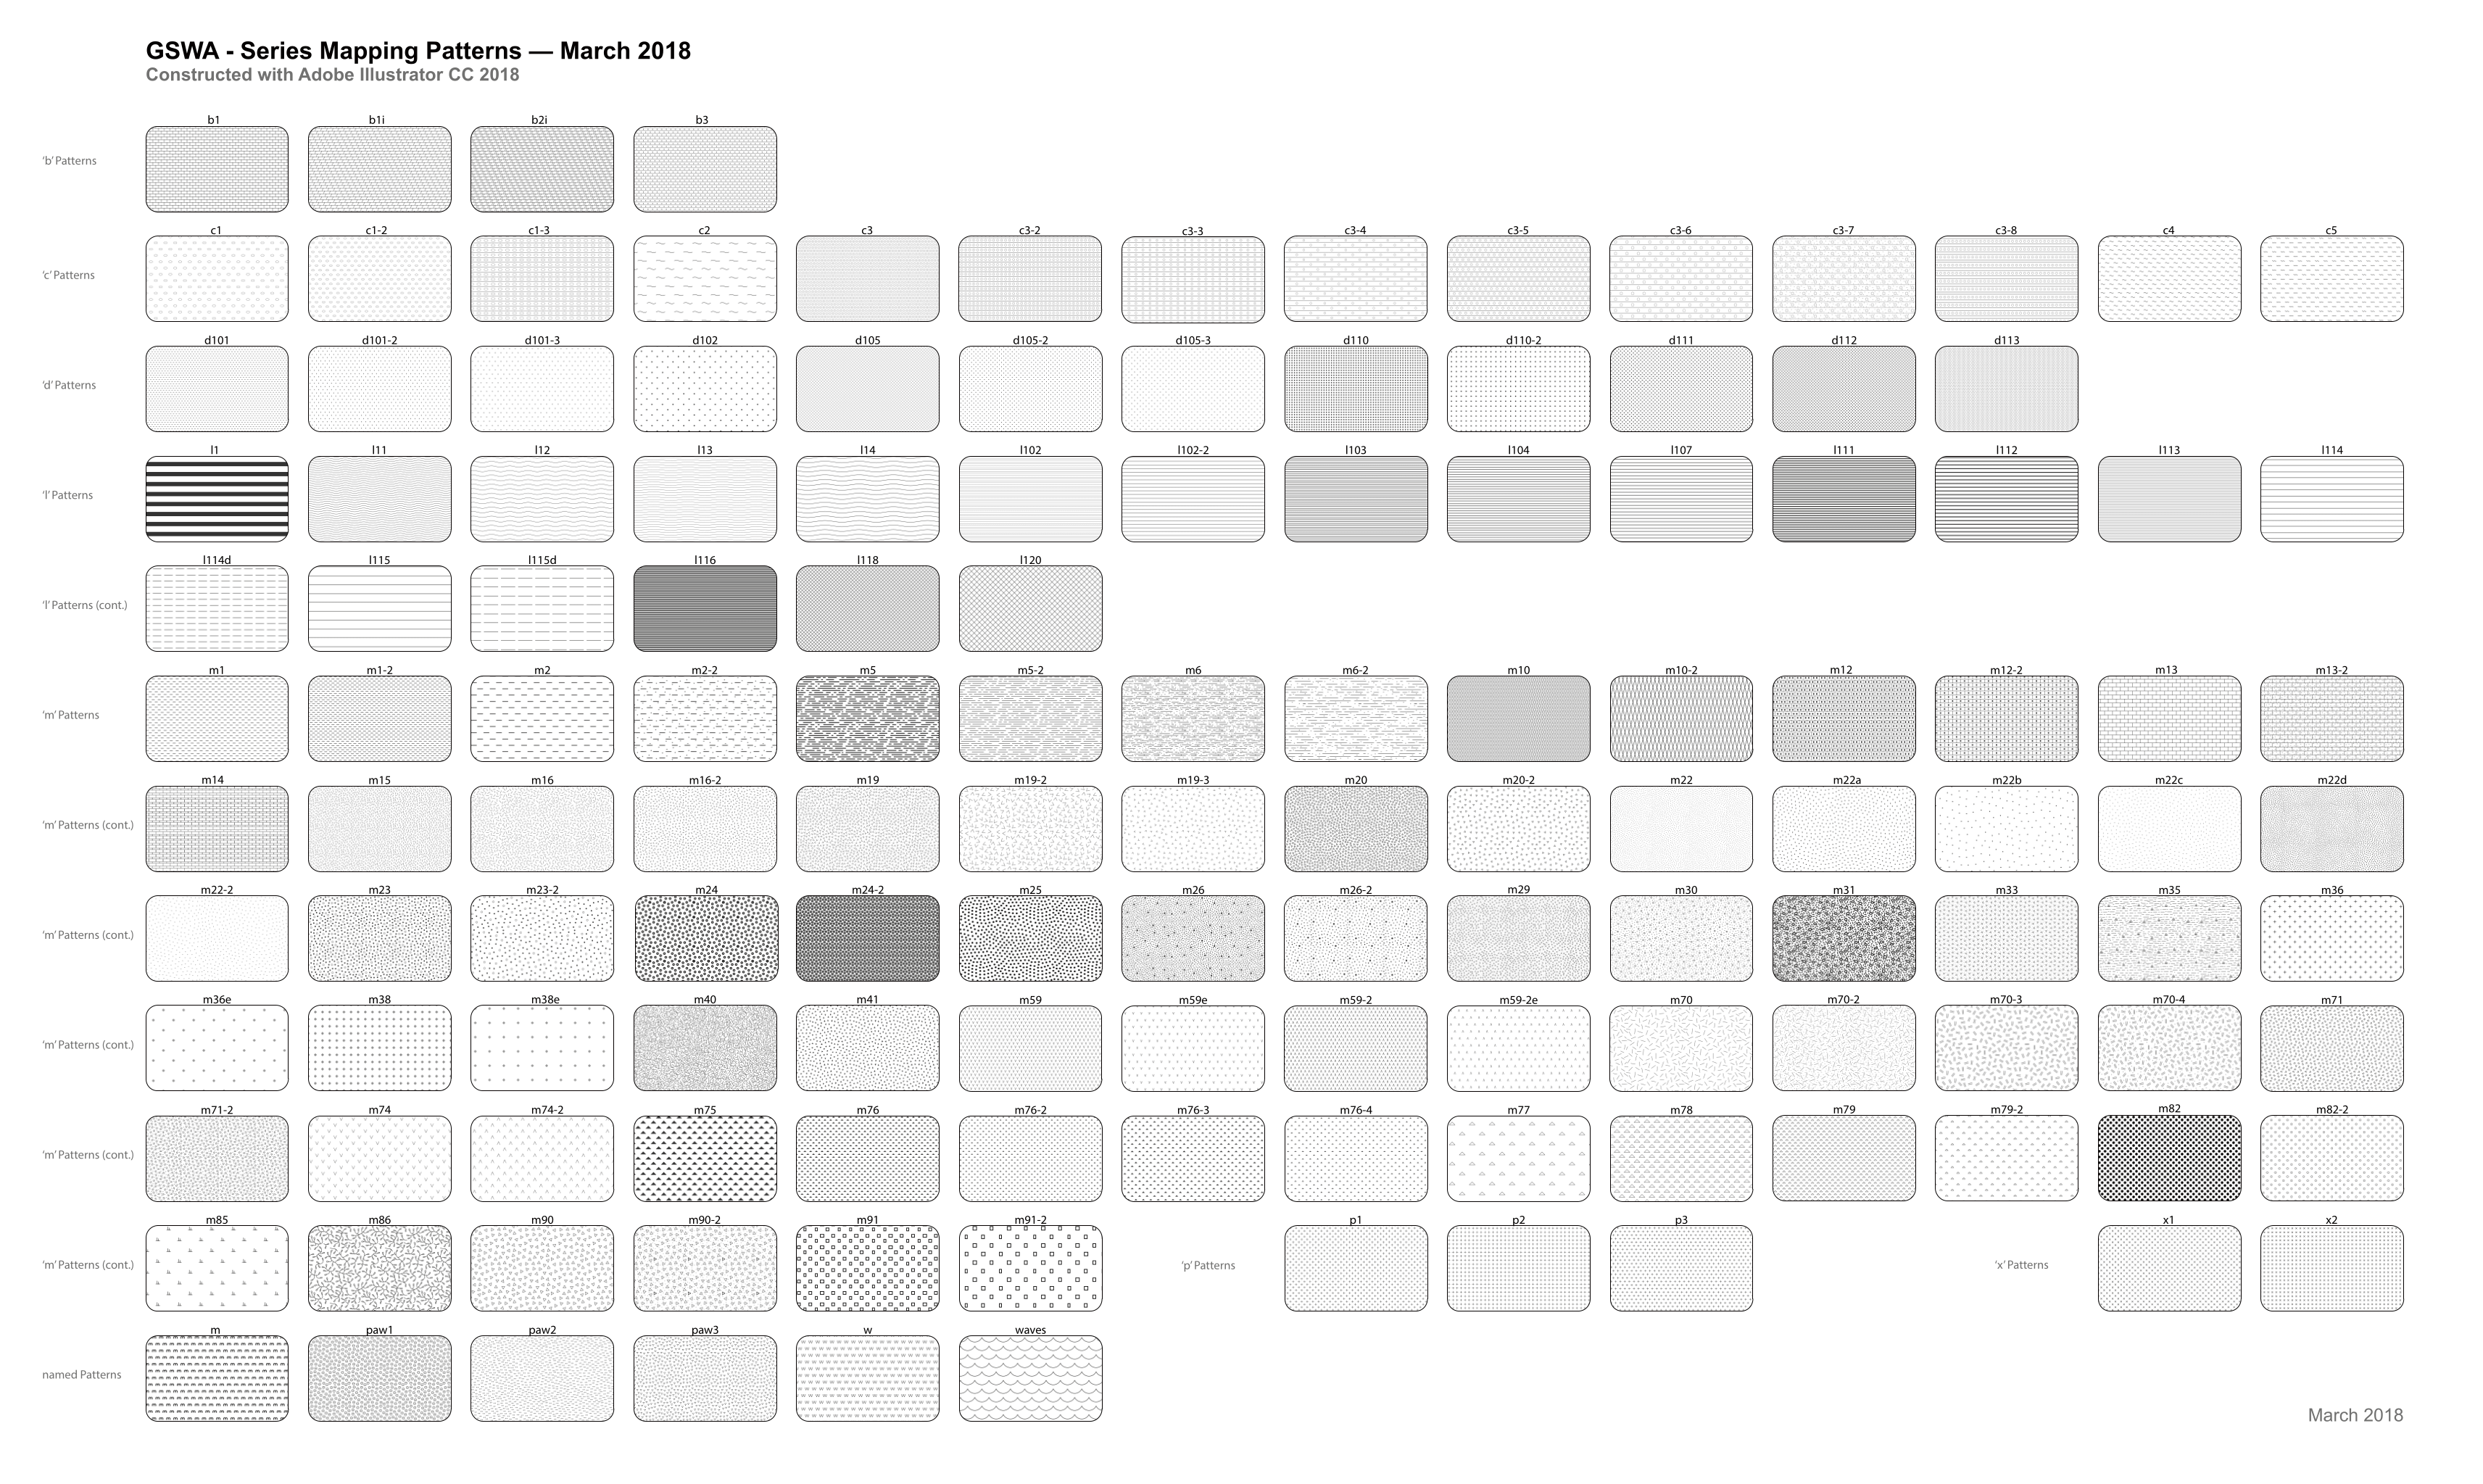 ../../_images/GSWA_Series_mapping_patterns_2018.png